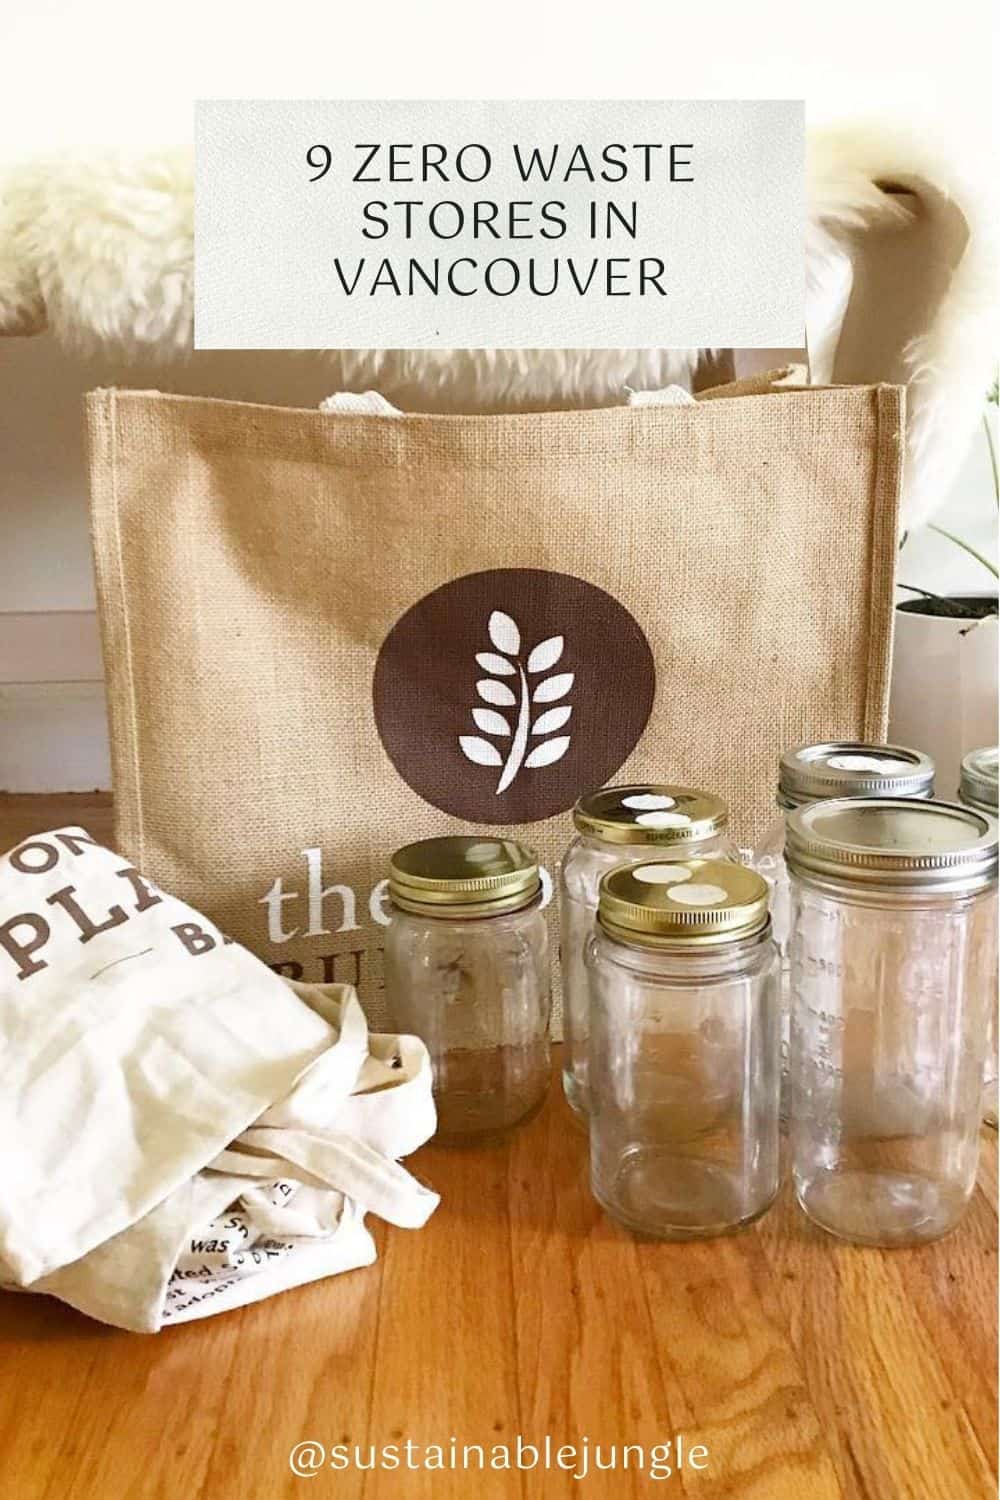 9 Vancouver Zero Waste Stores to Keep Beautiful British Columbia…Well, Beautiful Image by The Source Bulk Foods #zerowastestoreVancouver #bestzerowastestoresVancouver #bulkstoresVancouver #refillstoreVancouver #zerowasteshopping #sustainablejungle